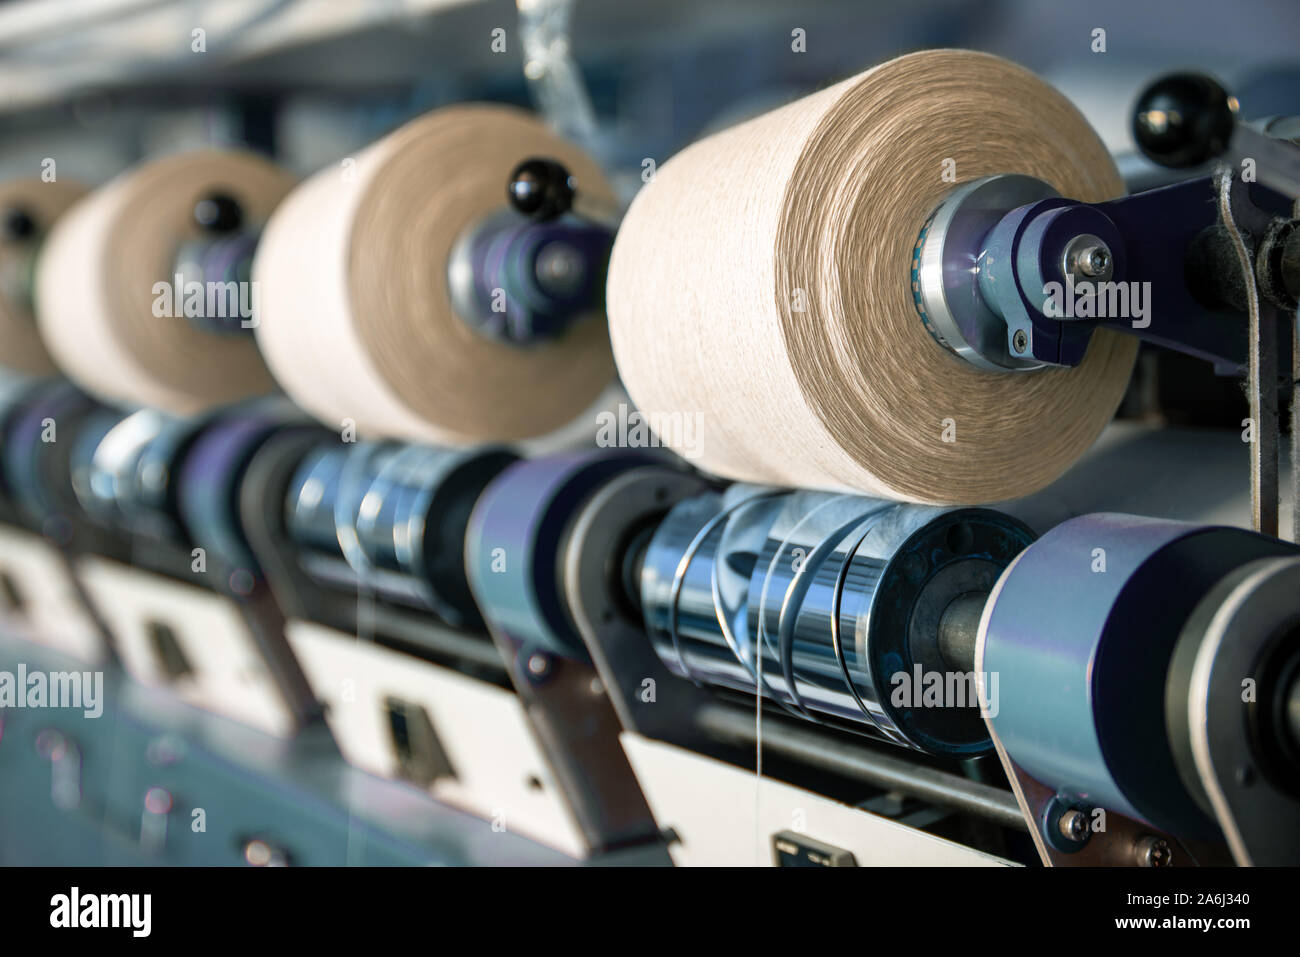 Interior of textile factory. Yarn manufacturing. Industrial concept. Stock Photo